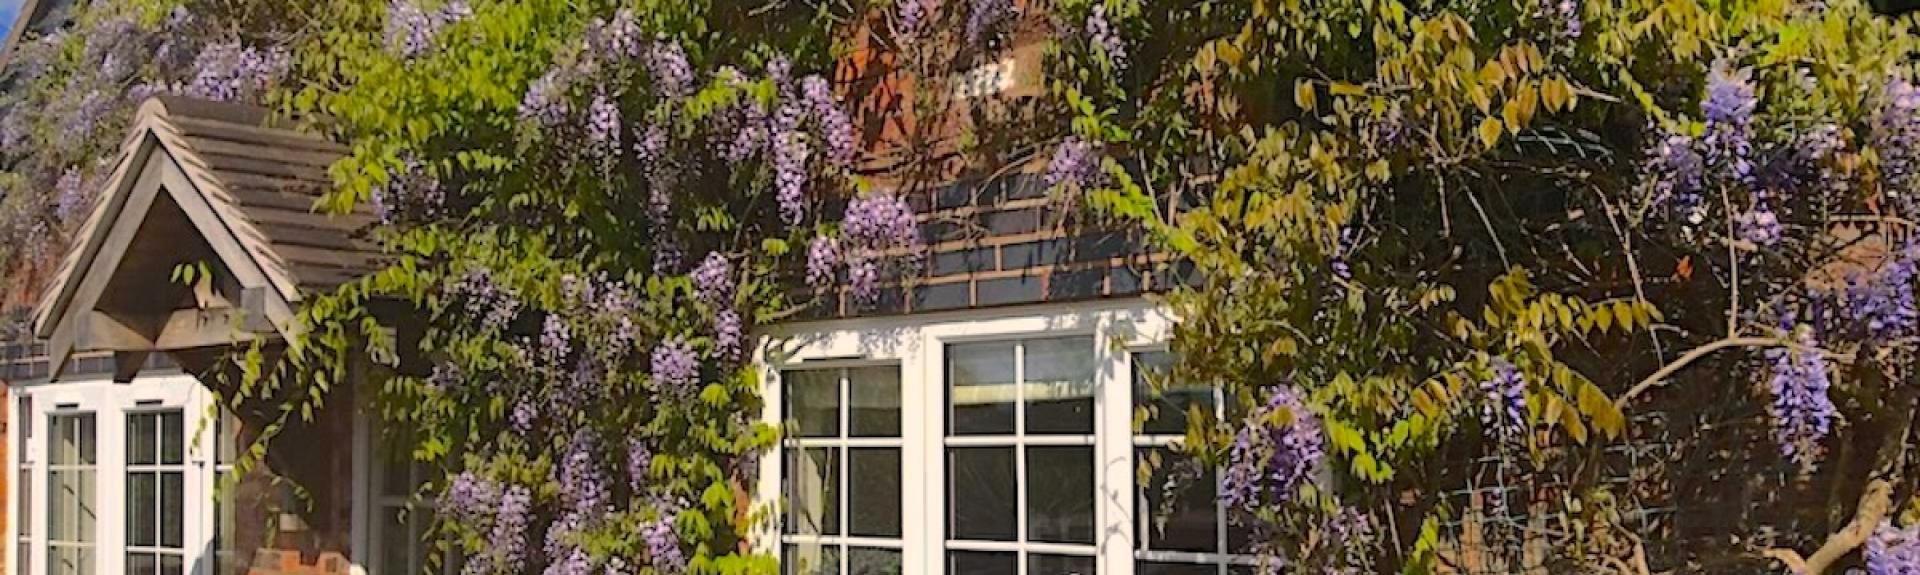 Flowering wistera climbs a house wall around cottage windows.